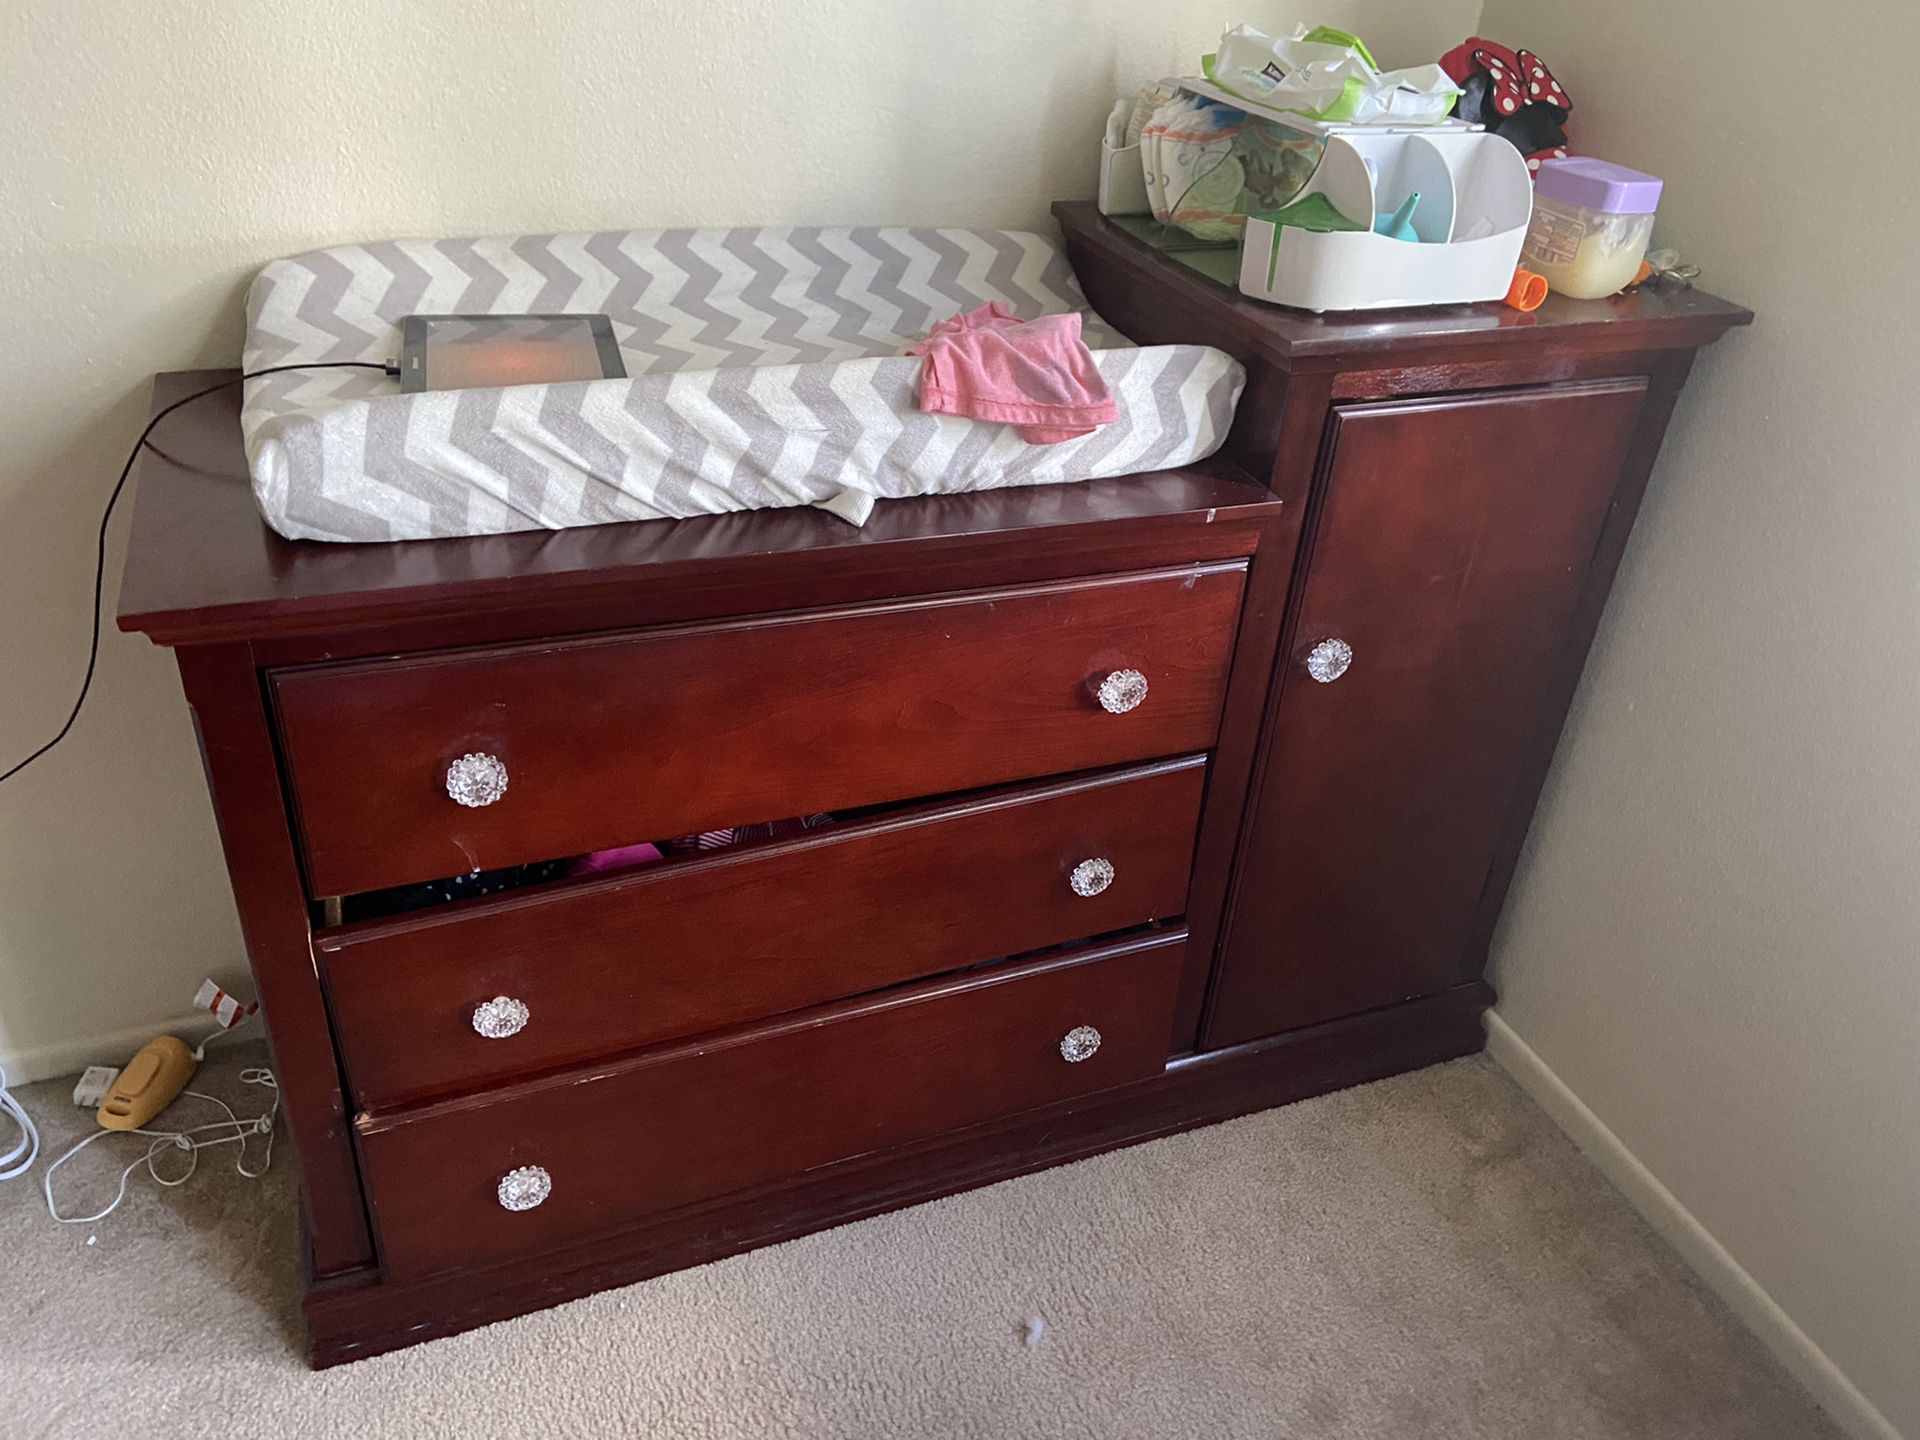 Dresser/changing table